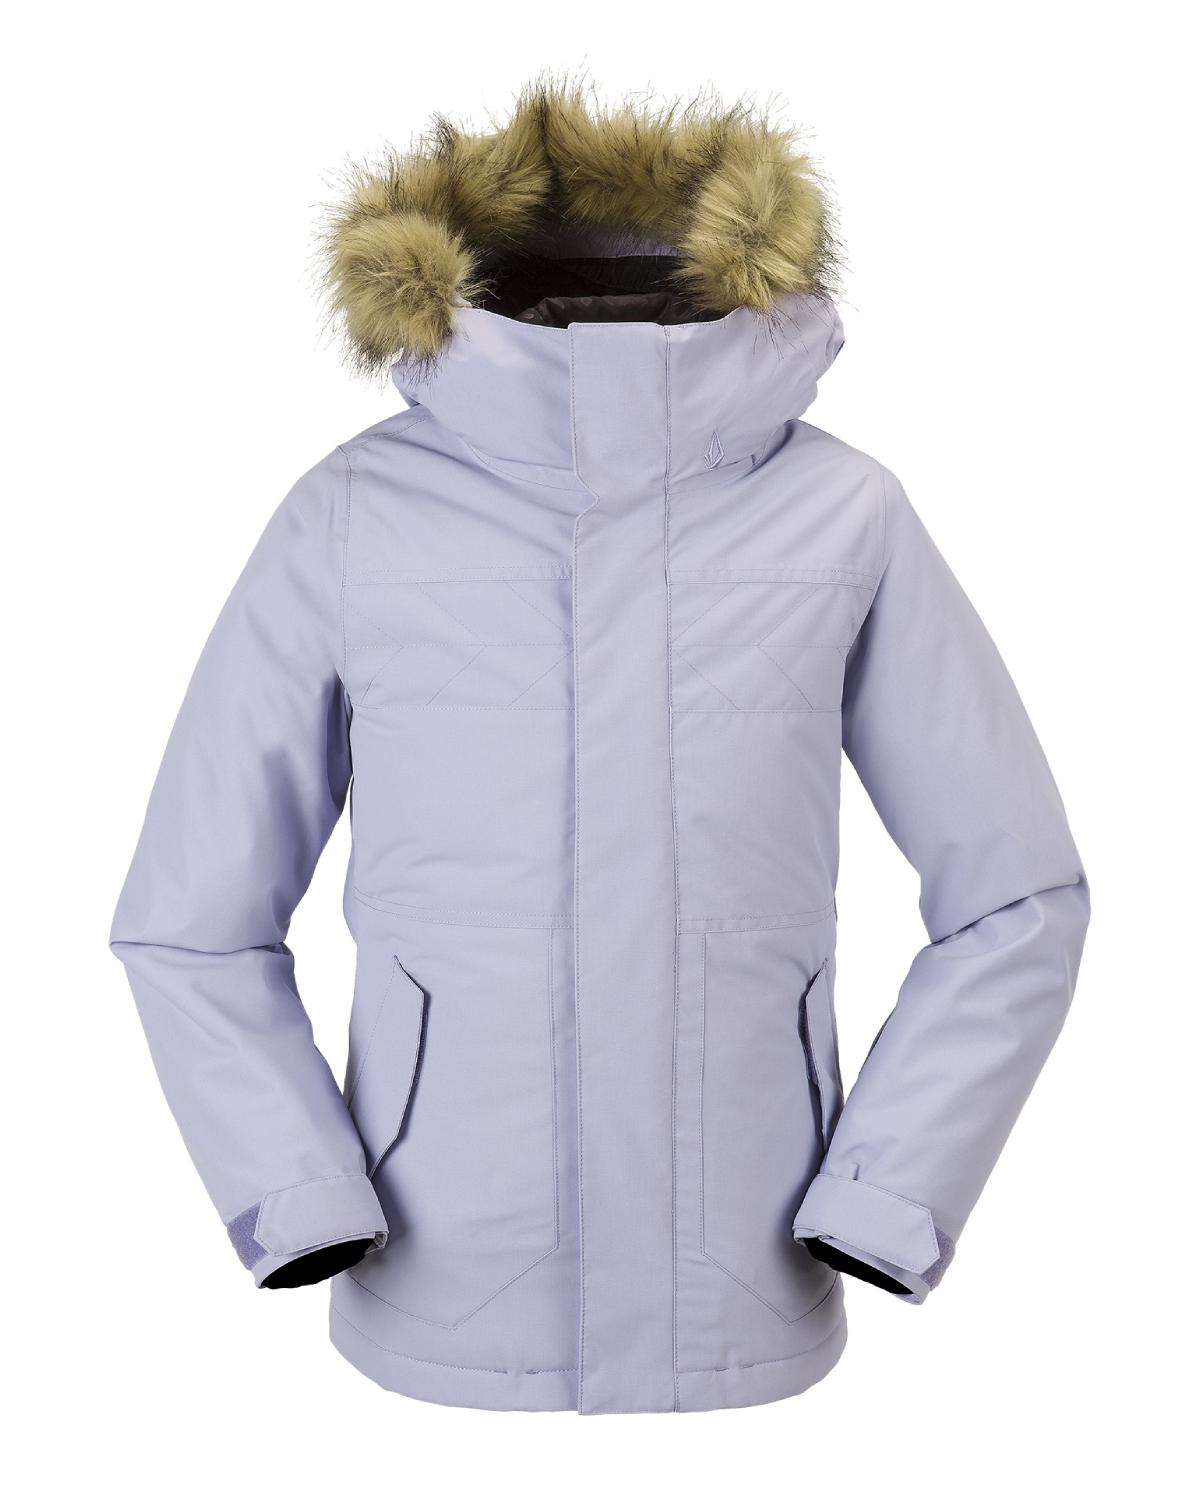 Volcom Kids So Minty Insulated Ski Jacket in Lilac (Ages 6 - 14)